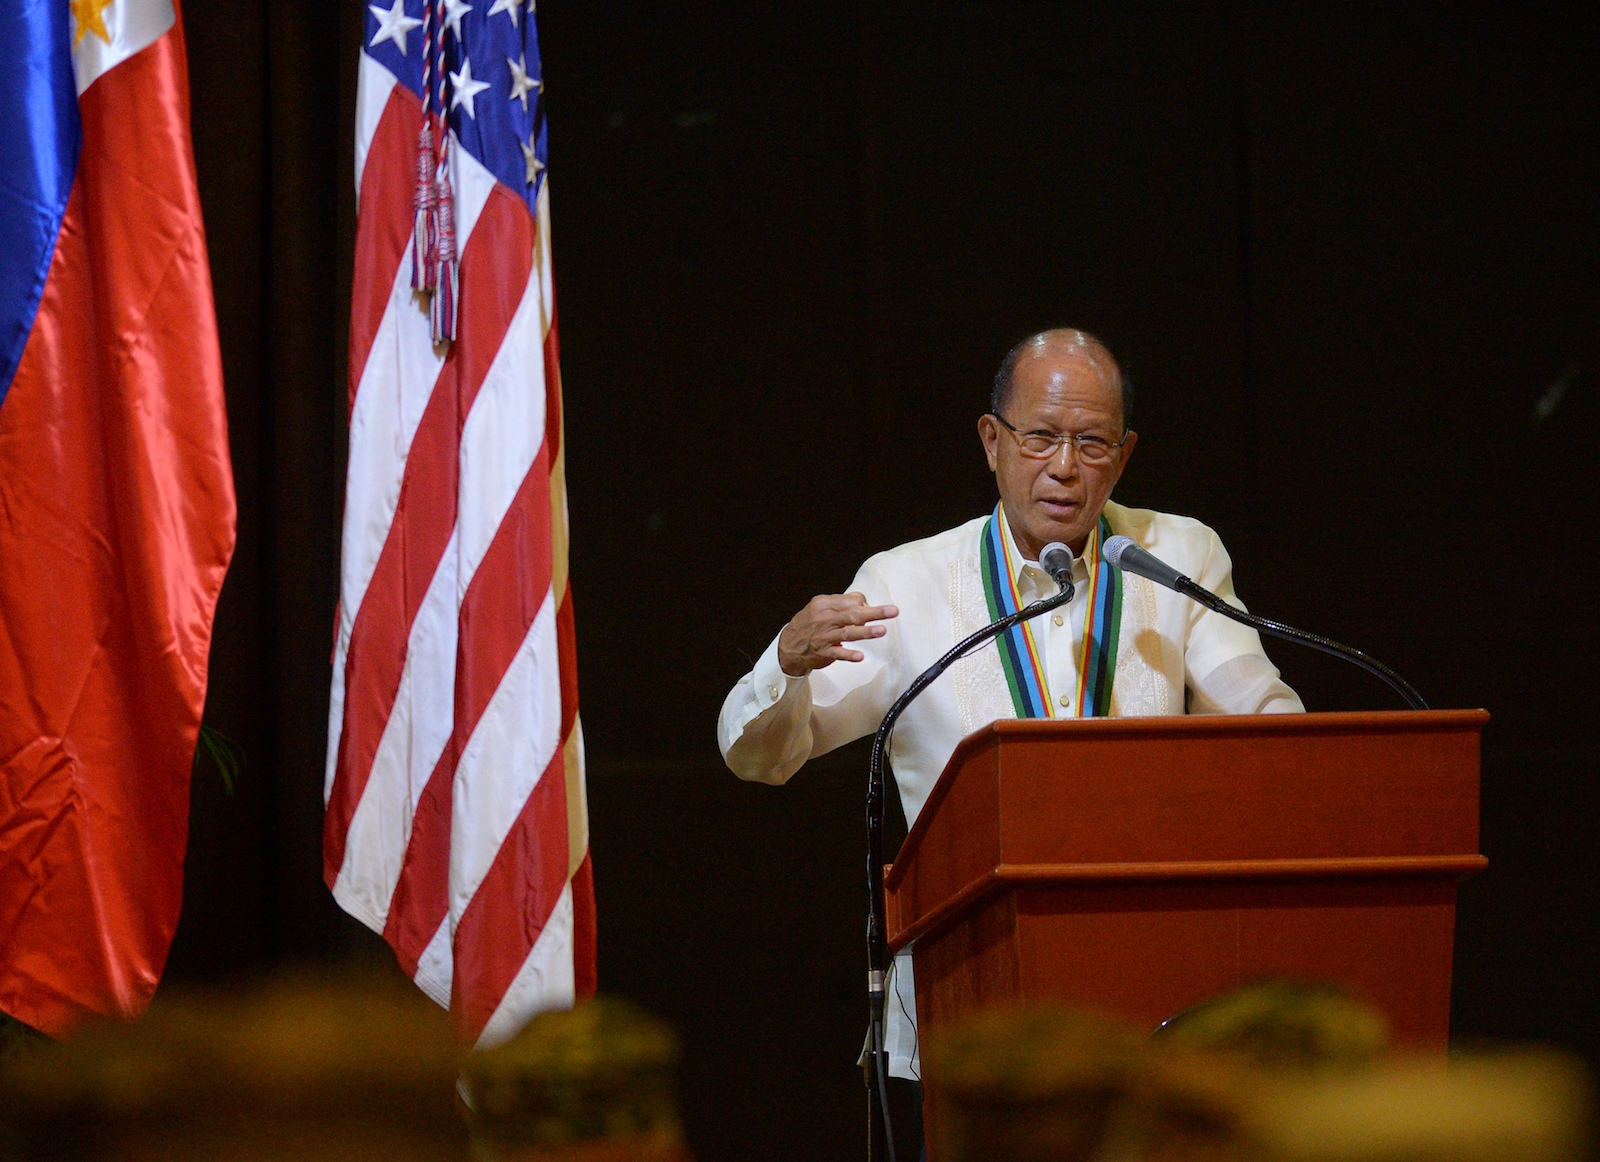 Philippines' Defense Secretary Delfin Lorenzana gestures as he delivers a speech during the closing ceremony of the annual joint US-Philippines military exercise in Manila on May 19, 2017. The Philippines and the United States launched annual military exercises on May 8 but the longtime allies scaled them down  which focuses only on counter-terrorism and disaster relief in line with President Rodrigo Duterte's pivot to China and Russia. / AFP PHOTO / TED ALJIBE